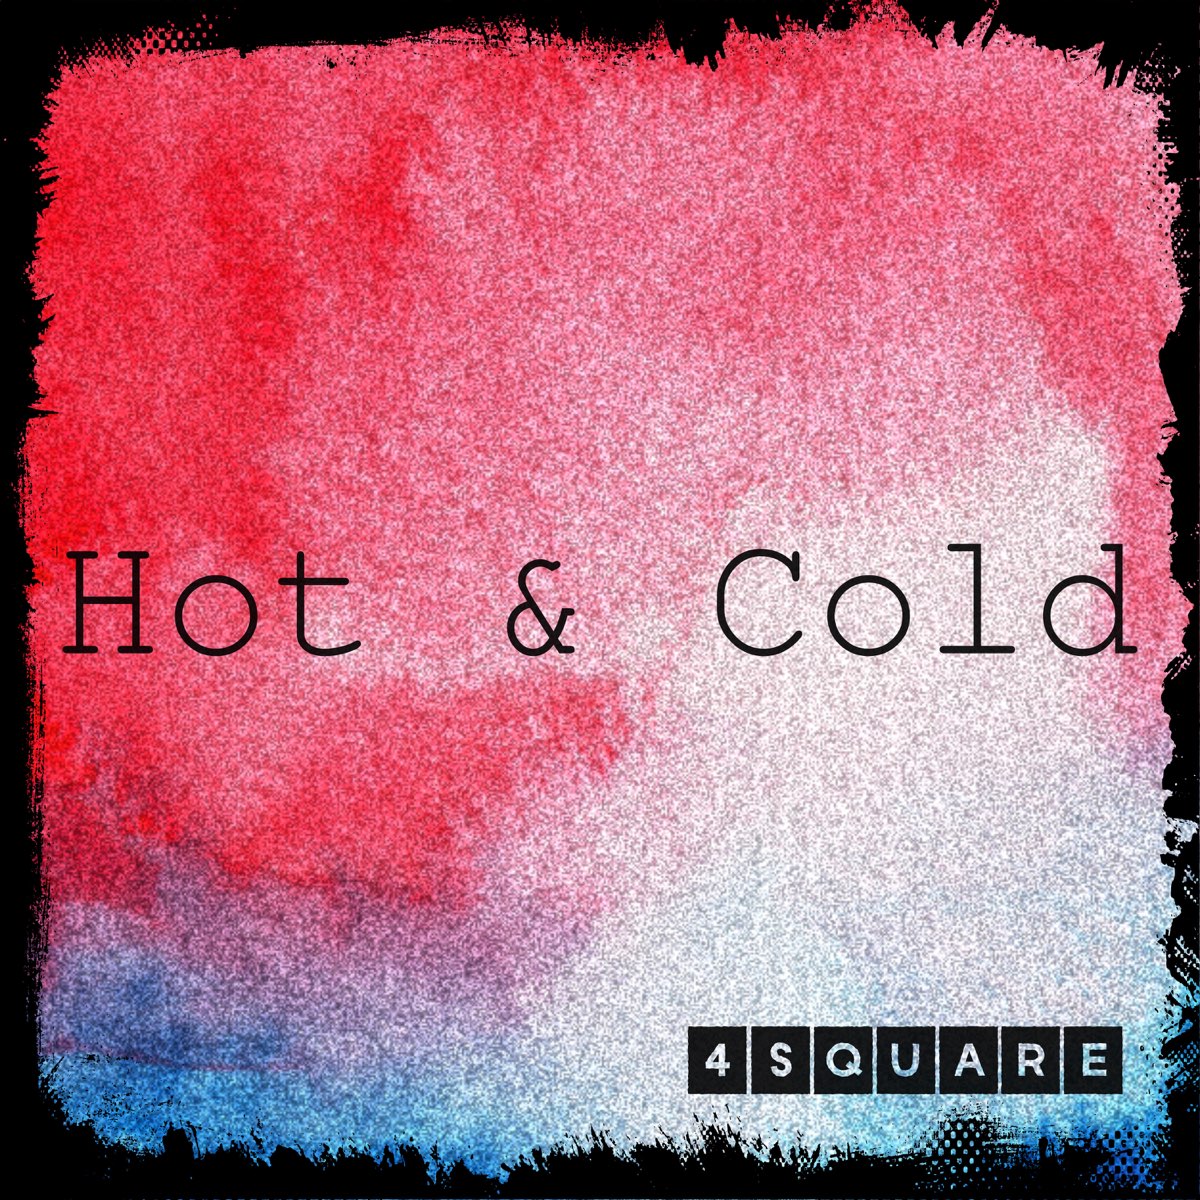 Hot Cold. 4mix hot and Cold. Cold музыка. Hot & Cold Эстетика.